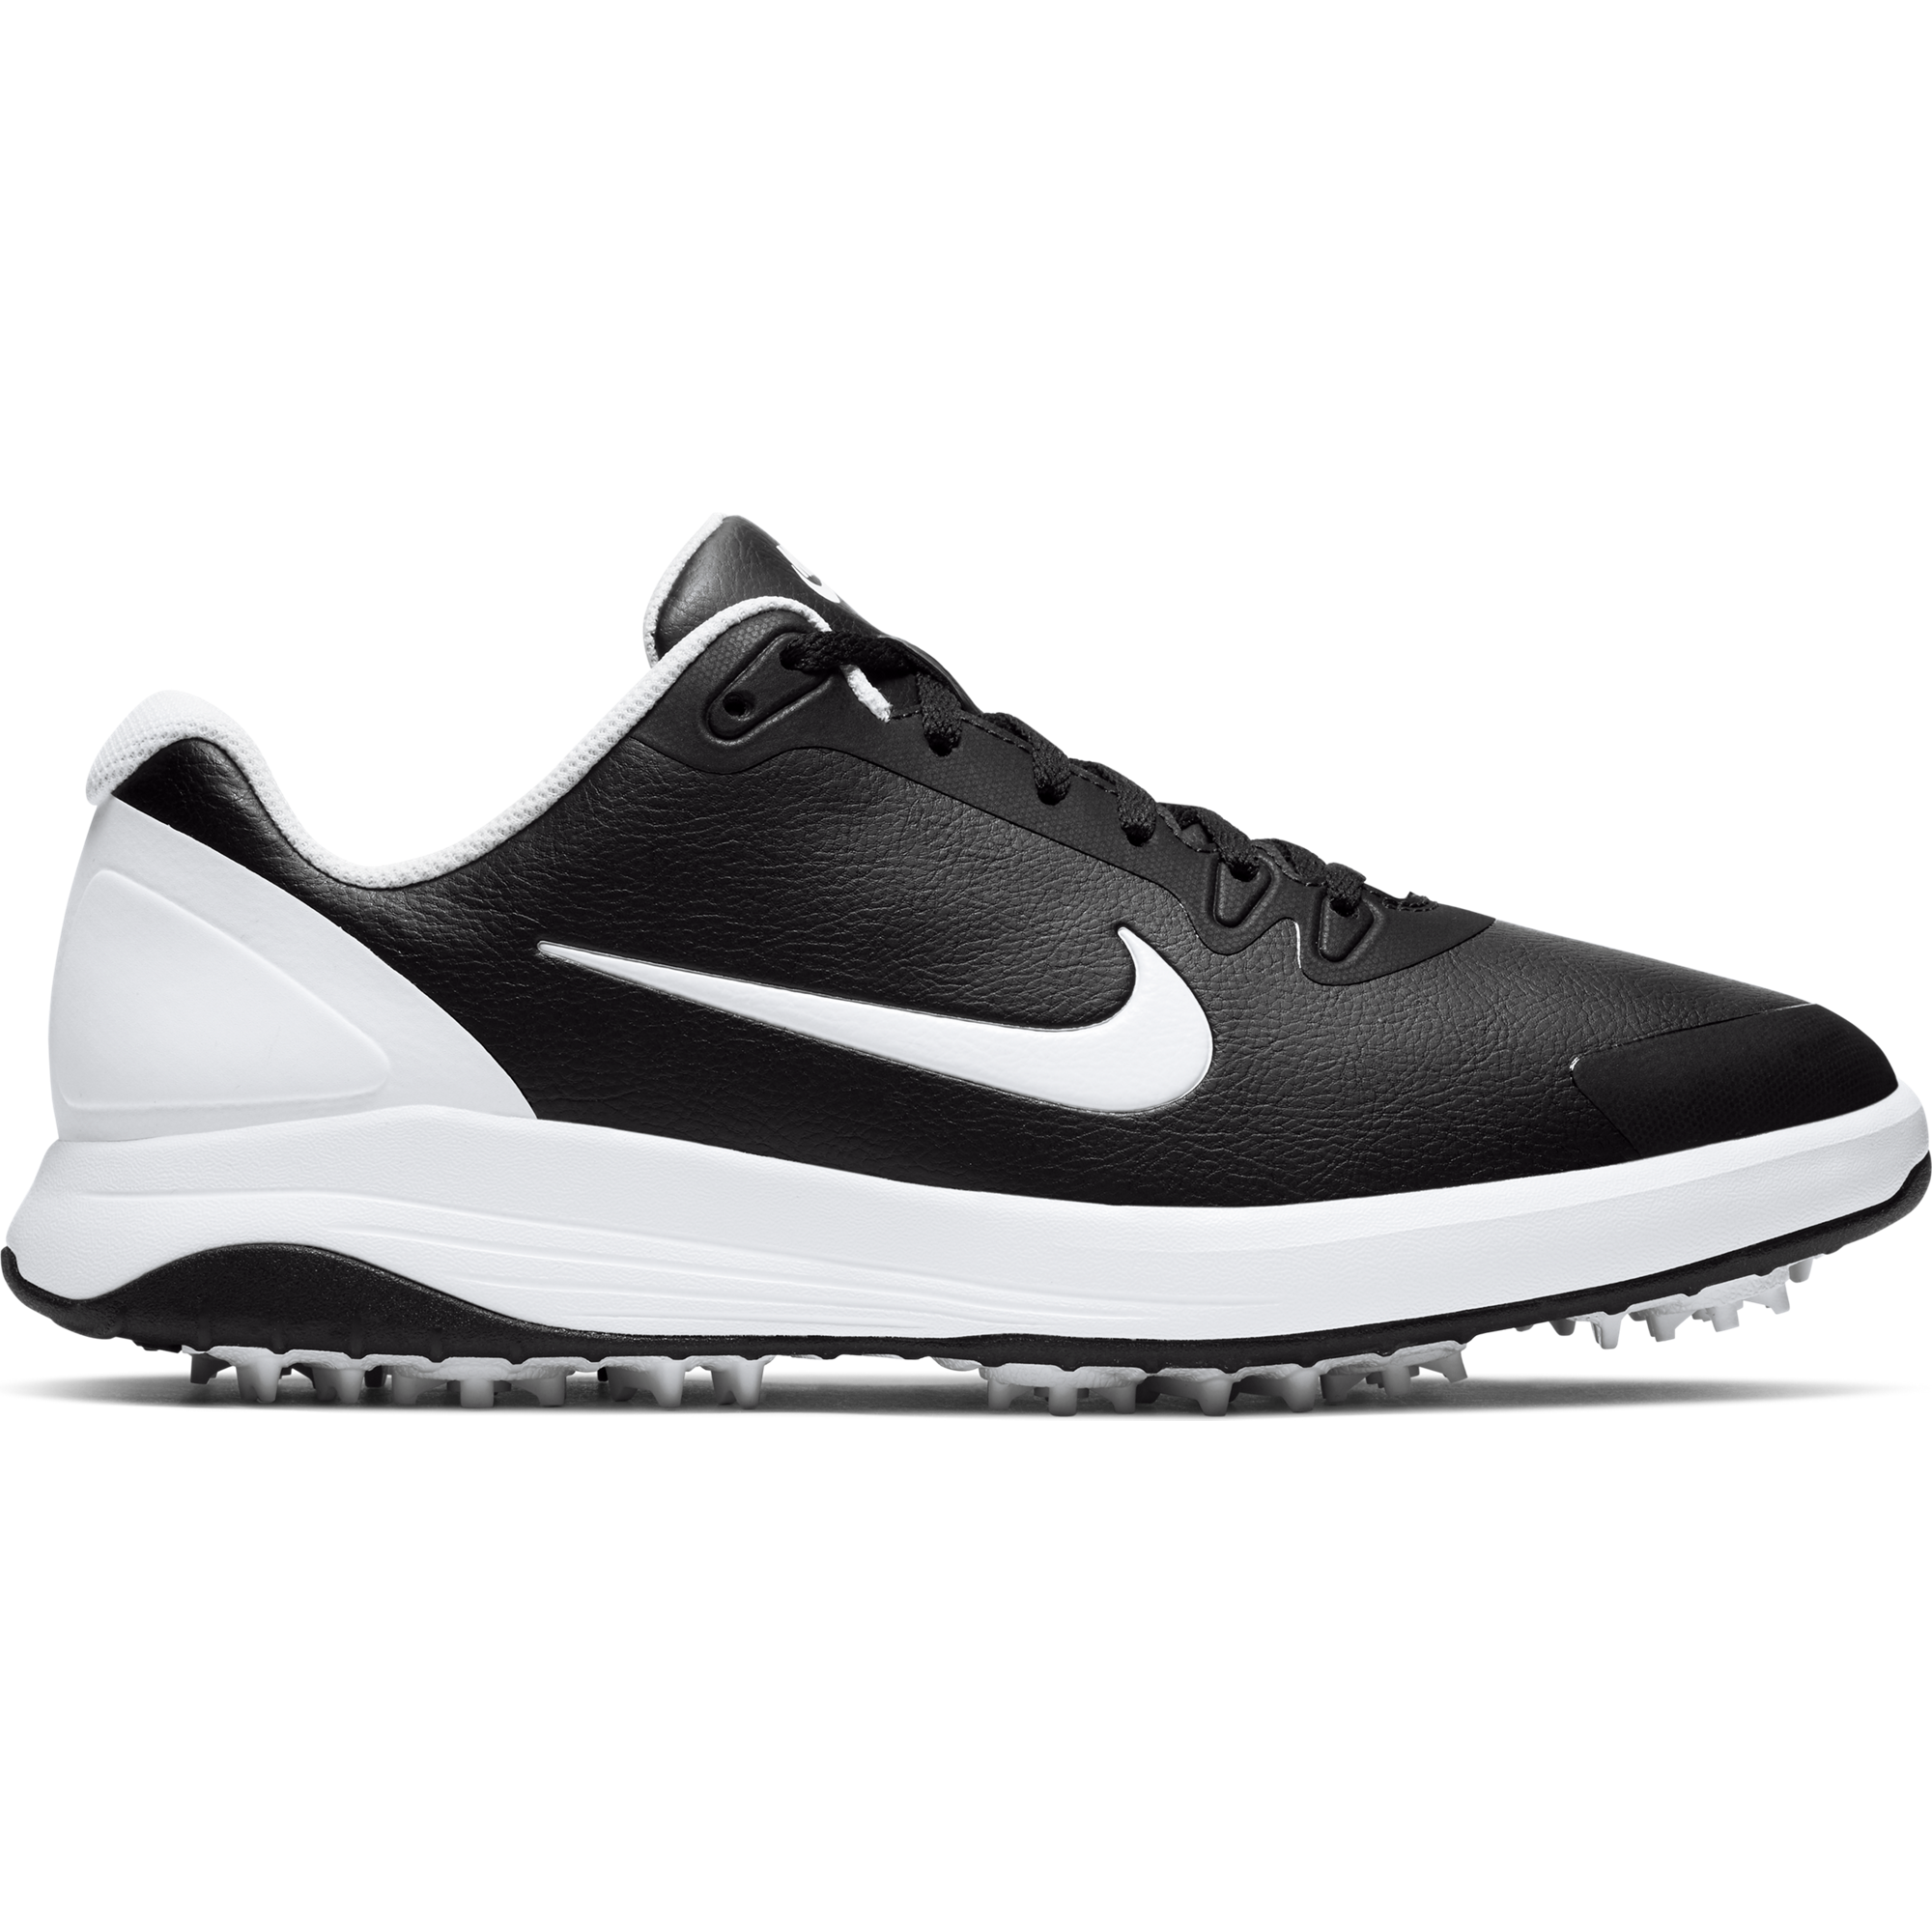 golf shoes online